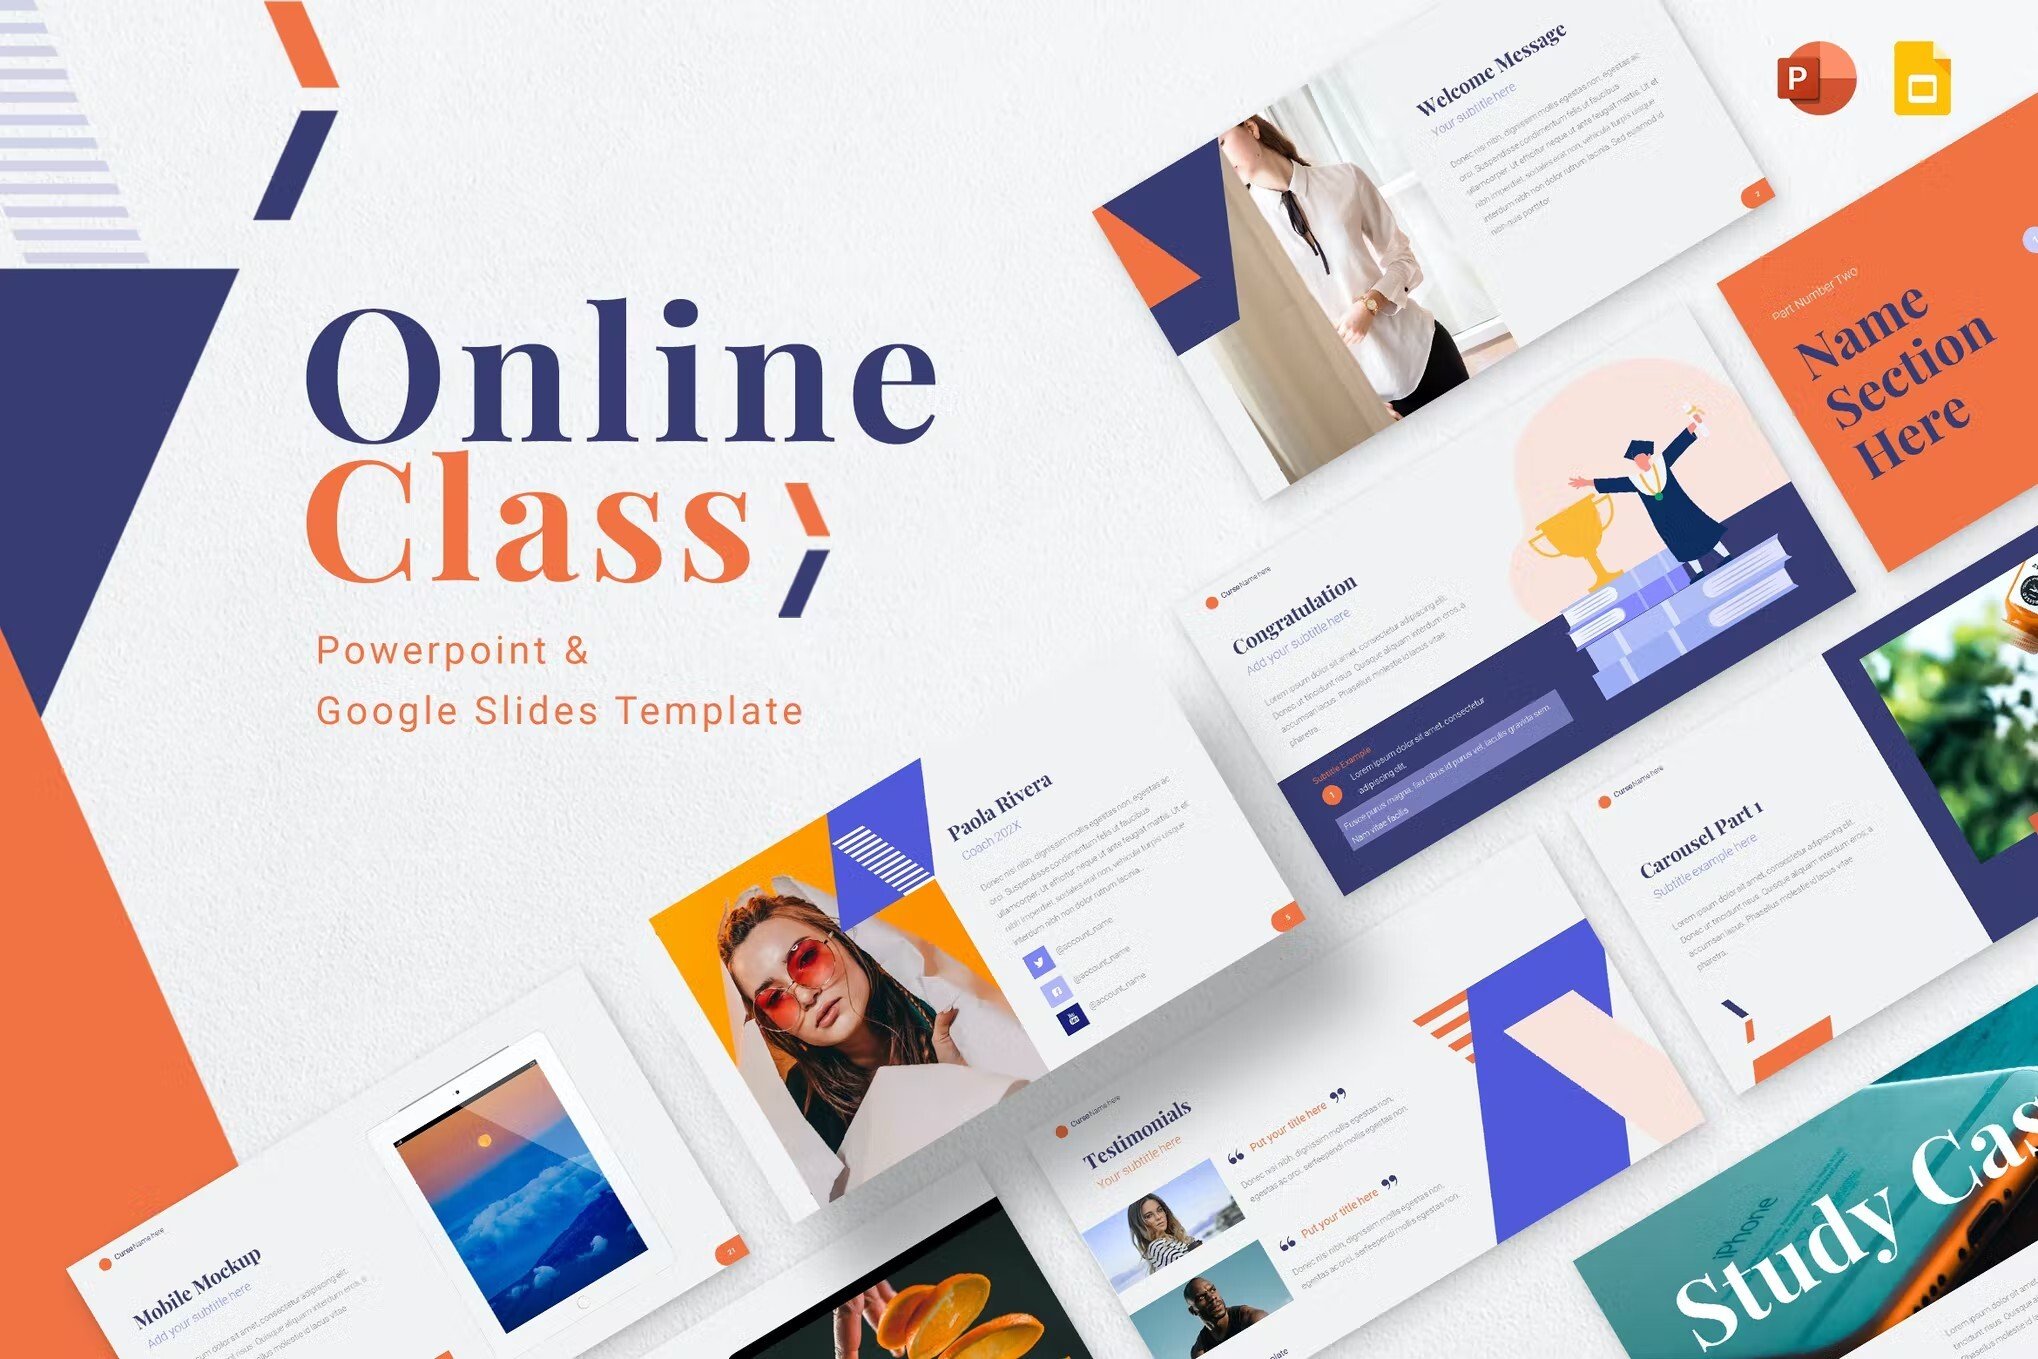 training-powerpoint-template-15 20+ Best Training & eLearning PowerPoint Templates (Education PPTs) design tips 